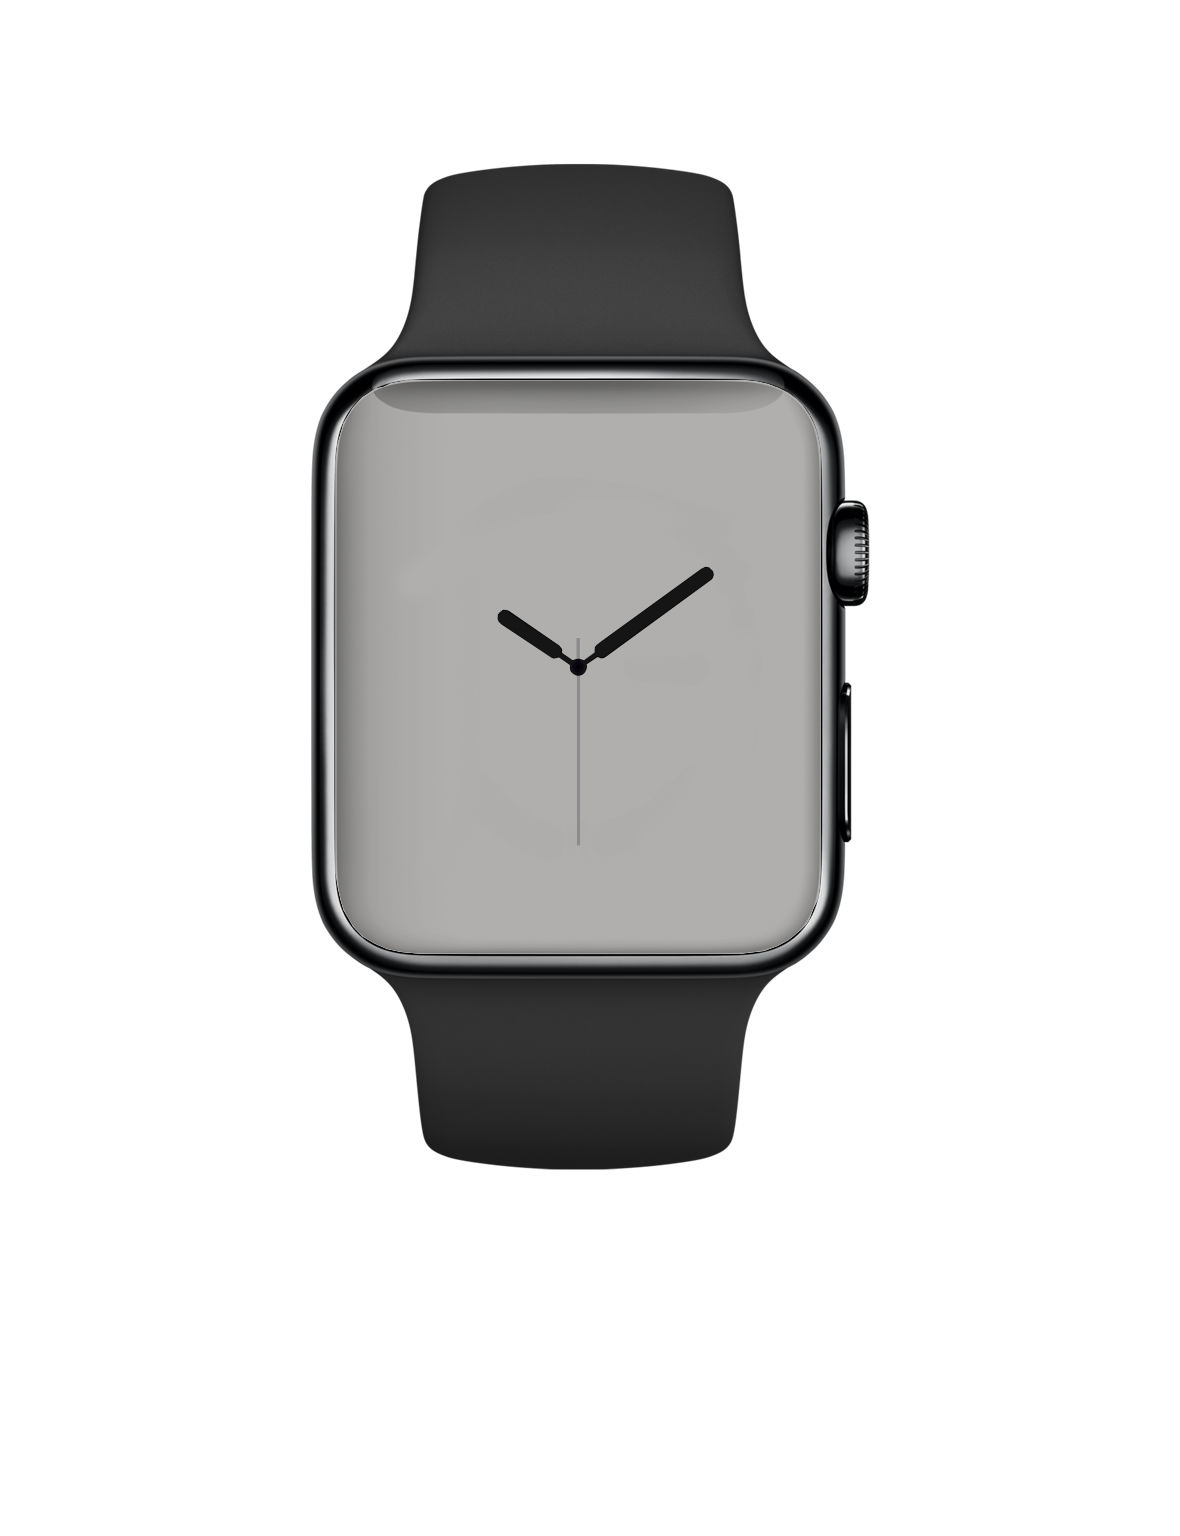 Post custom watch faces for Apple Watch [Merged] | Page 20 | MacRumors  Forums